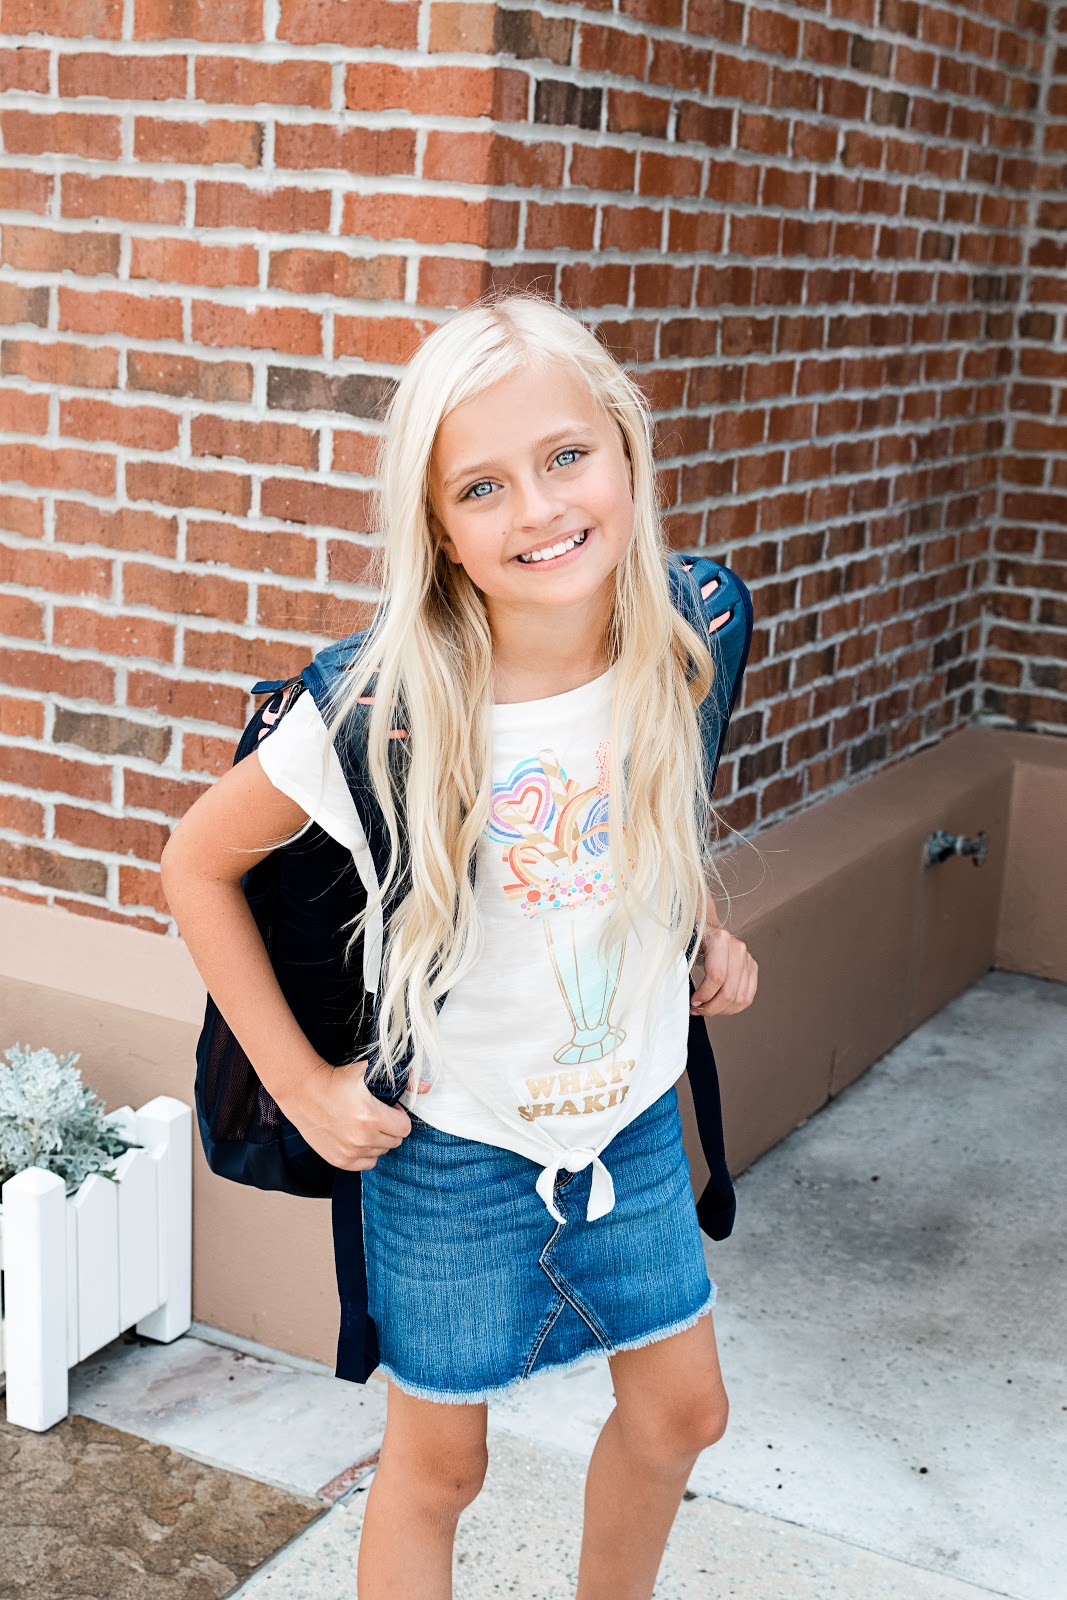 Back to School Shopping and First Day Looks with OshKosh! OshKosh Bgosh Back to School shirt back to school pants back to school shorts back to school skirt back to school look backpack outfit style clothes fashion ideas inspiration back to school shopping  OshKosh coupon code OshKosh promo code